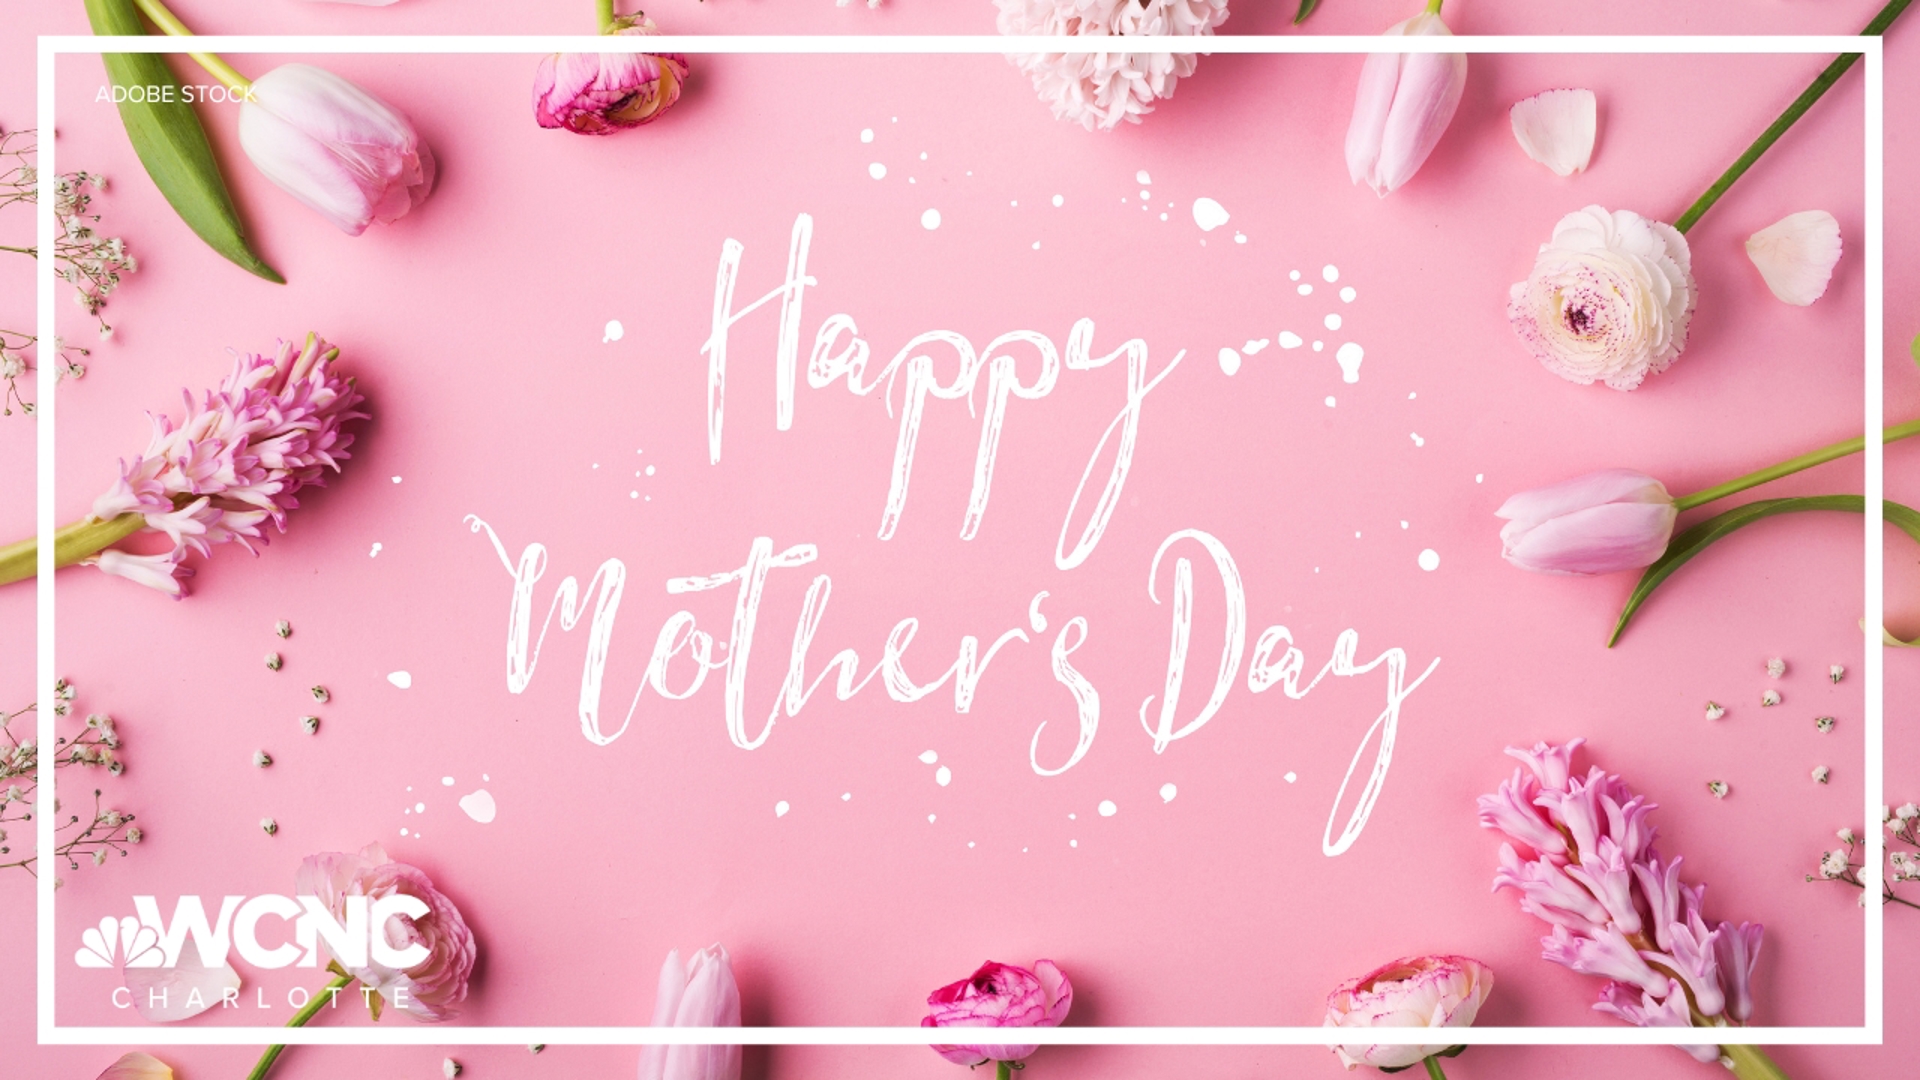 Happy Mother's Day! WCNC Charlotte wants to celebrate with all the moms out there!